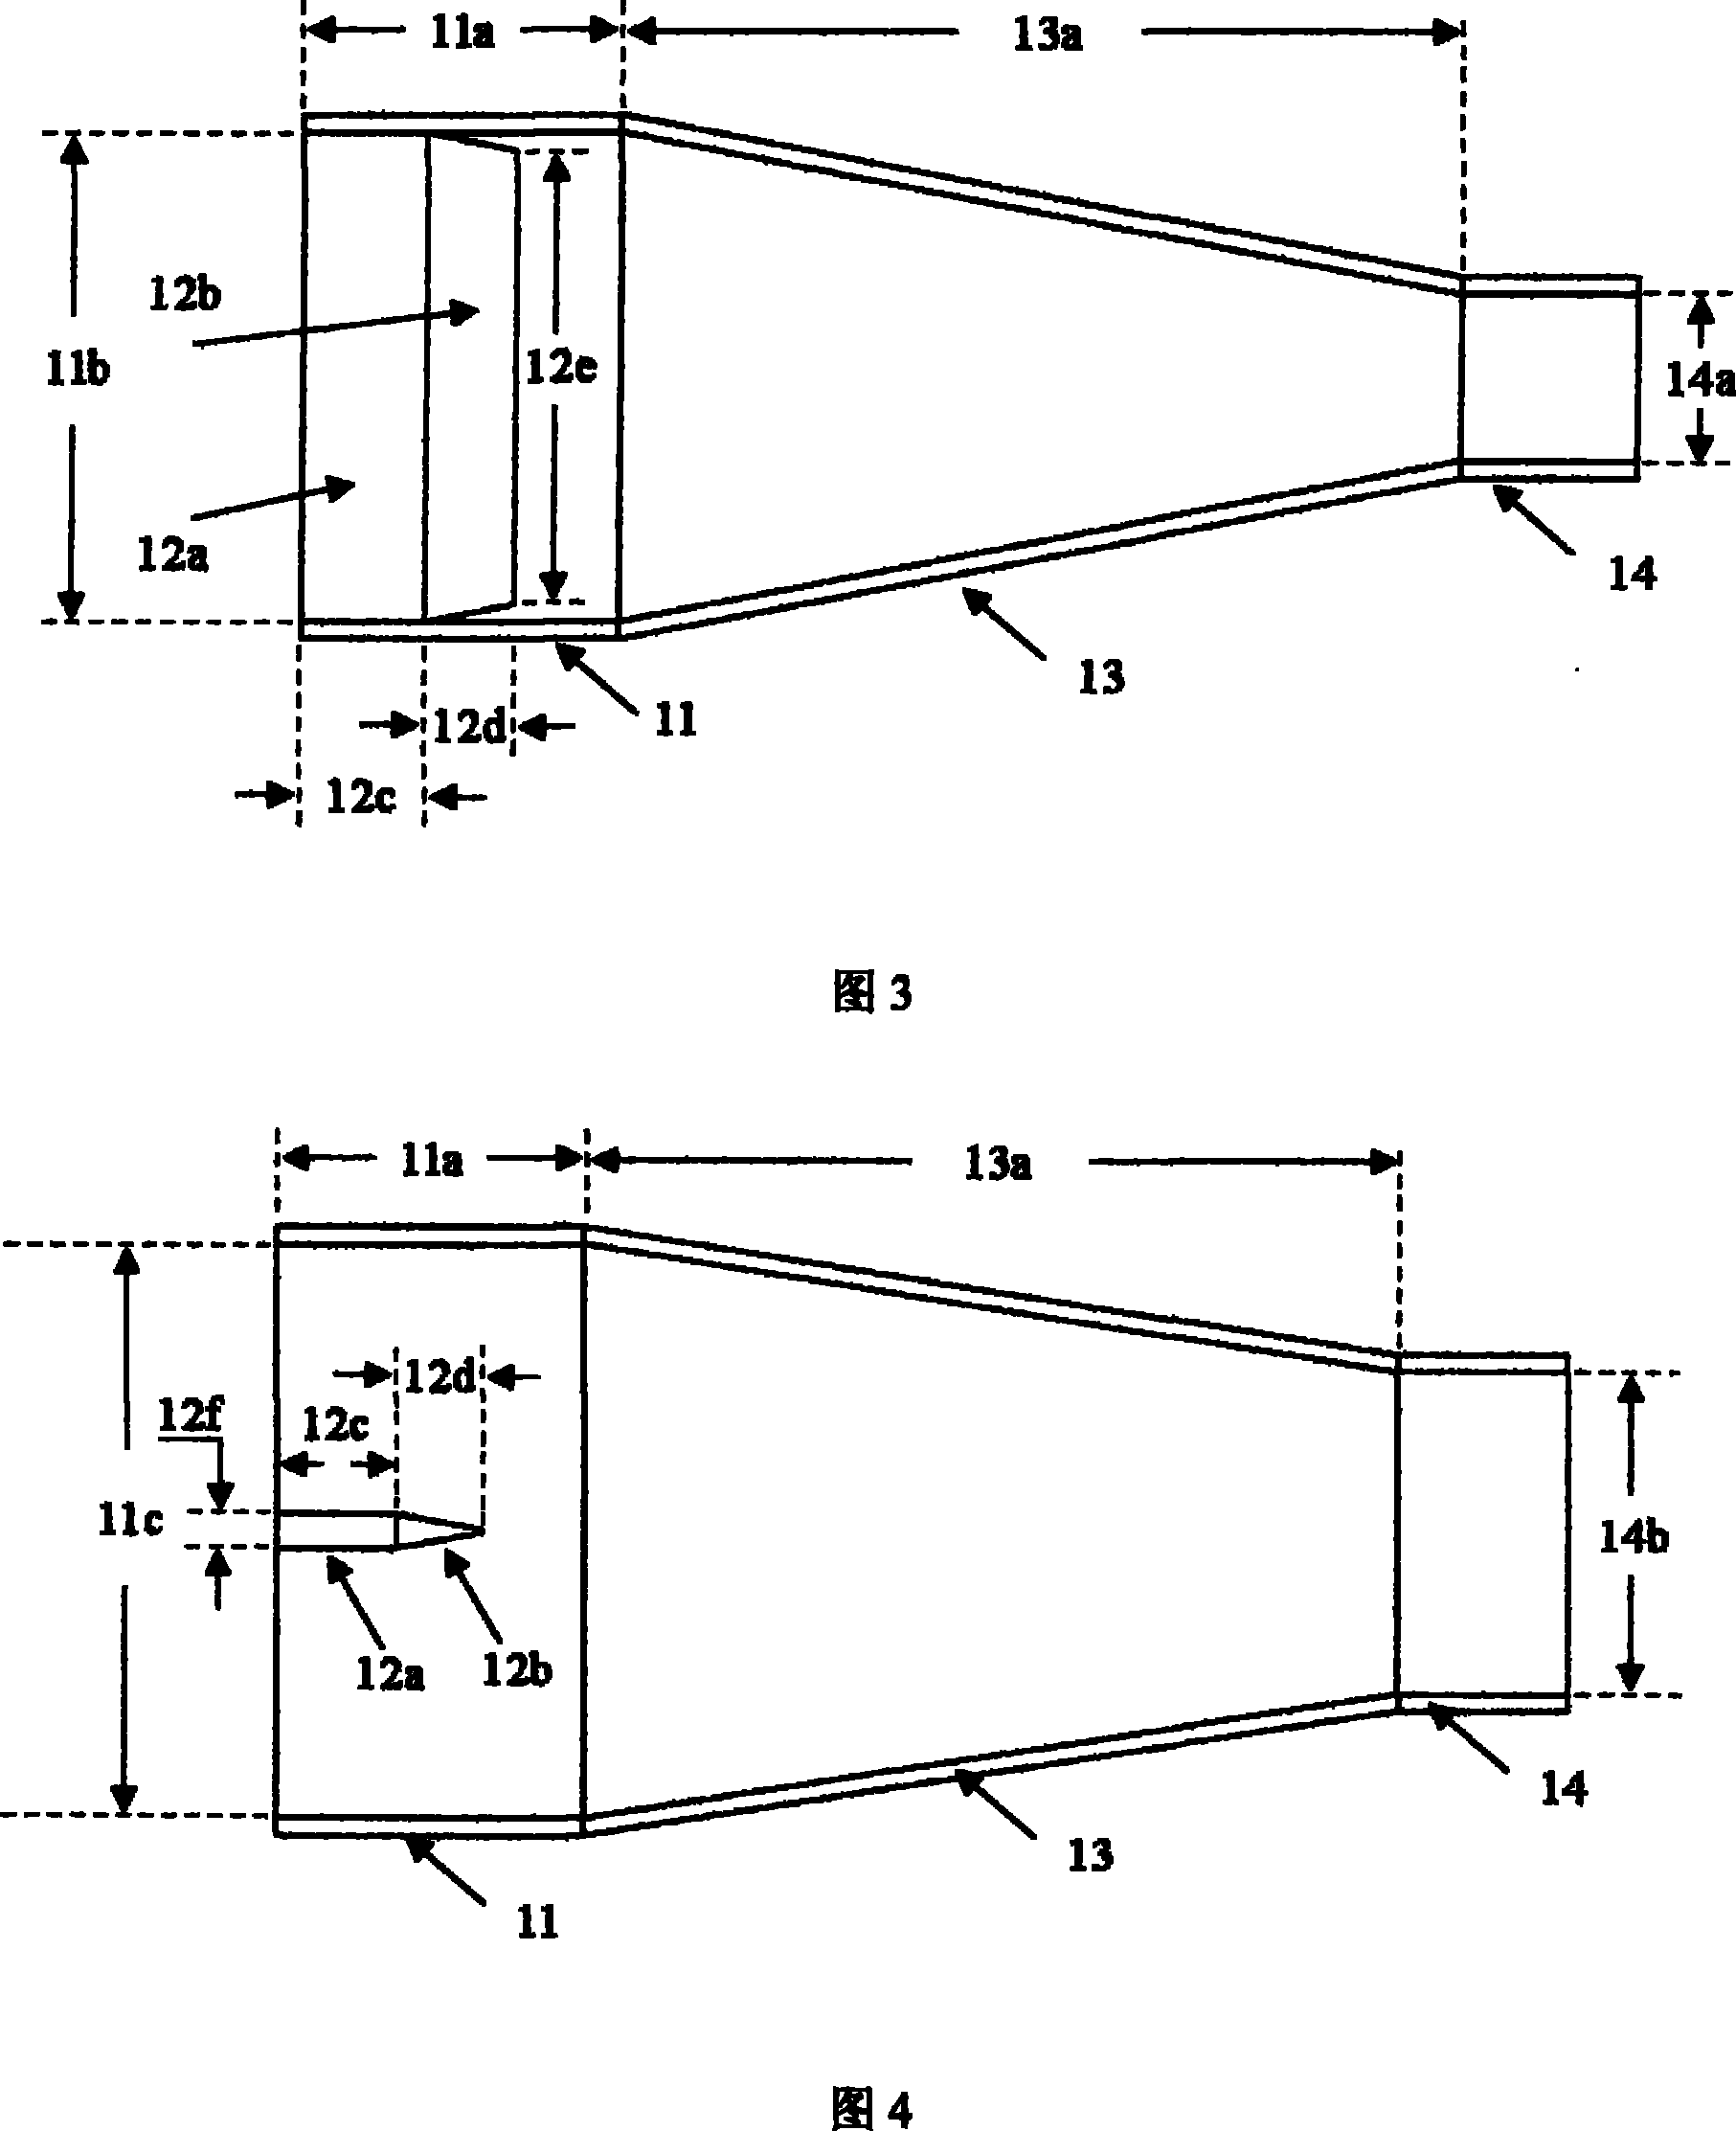 Power dividing horn antenna for space power synthesis and array thereof